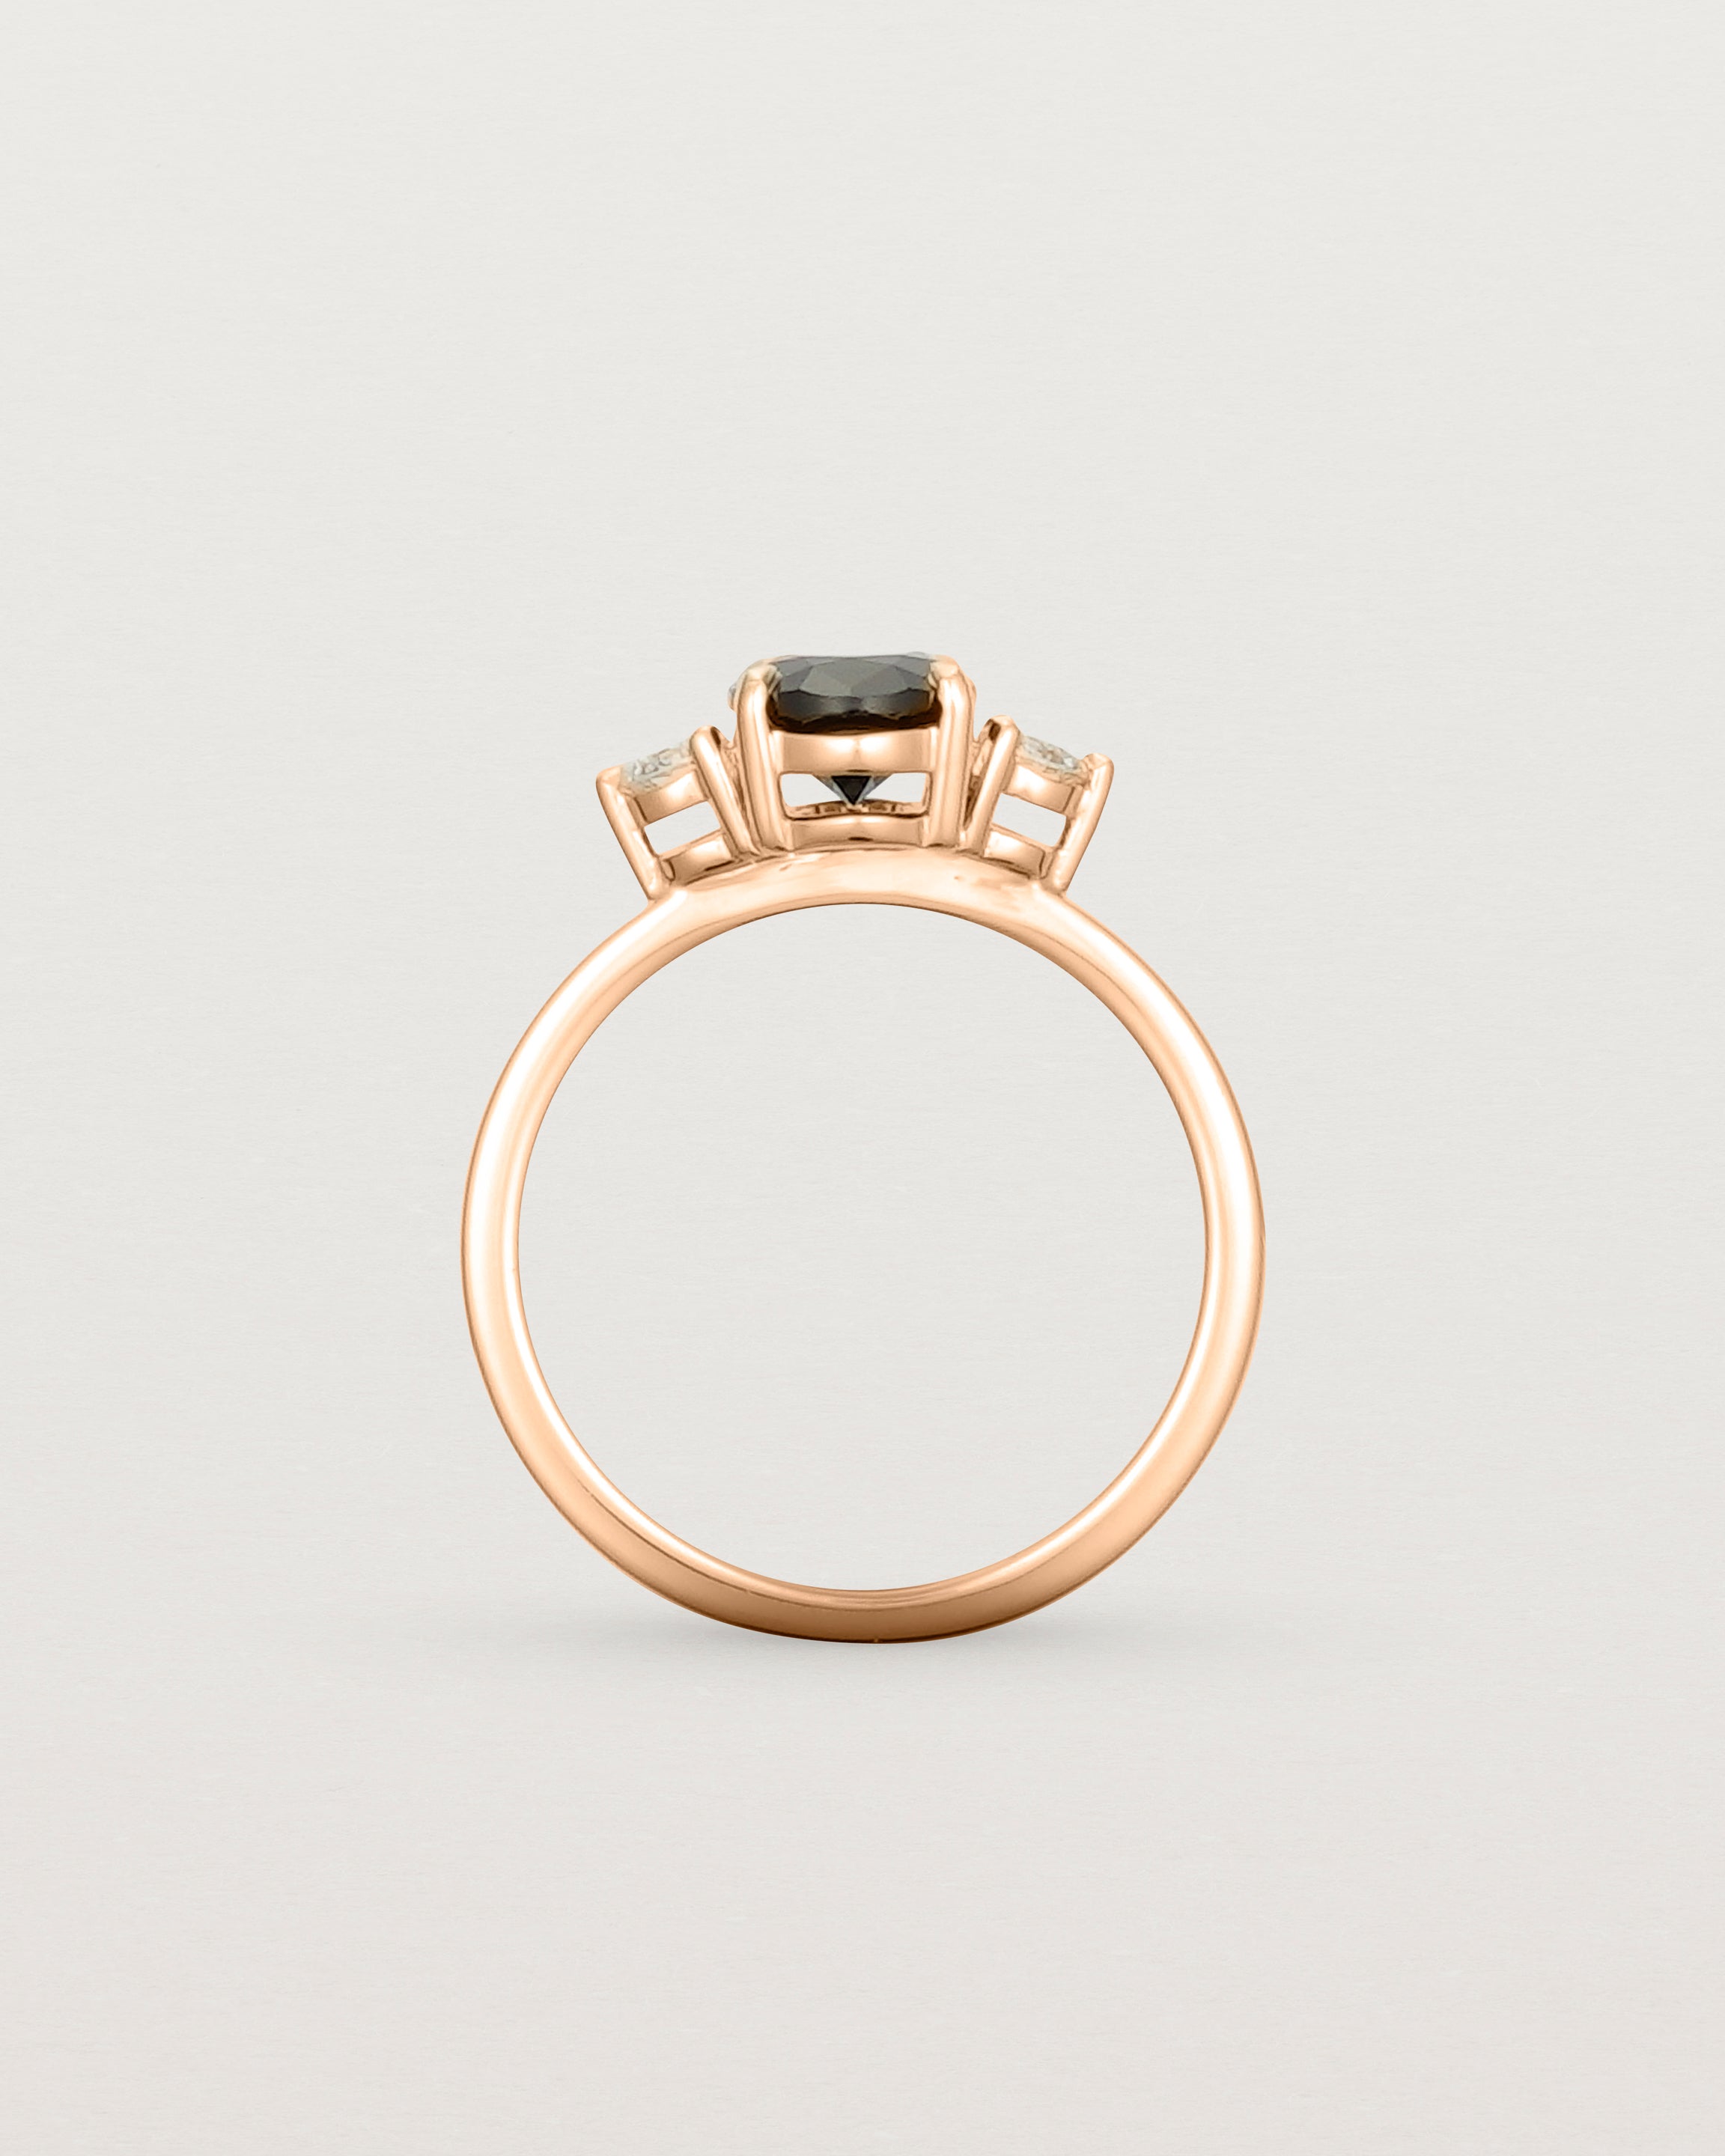 Standing view of the Una Oval Trio Ring | Black Spinel & Diamonds | Rose Gold.